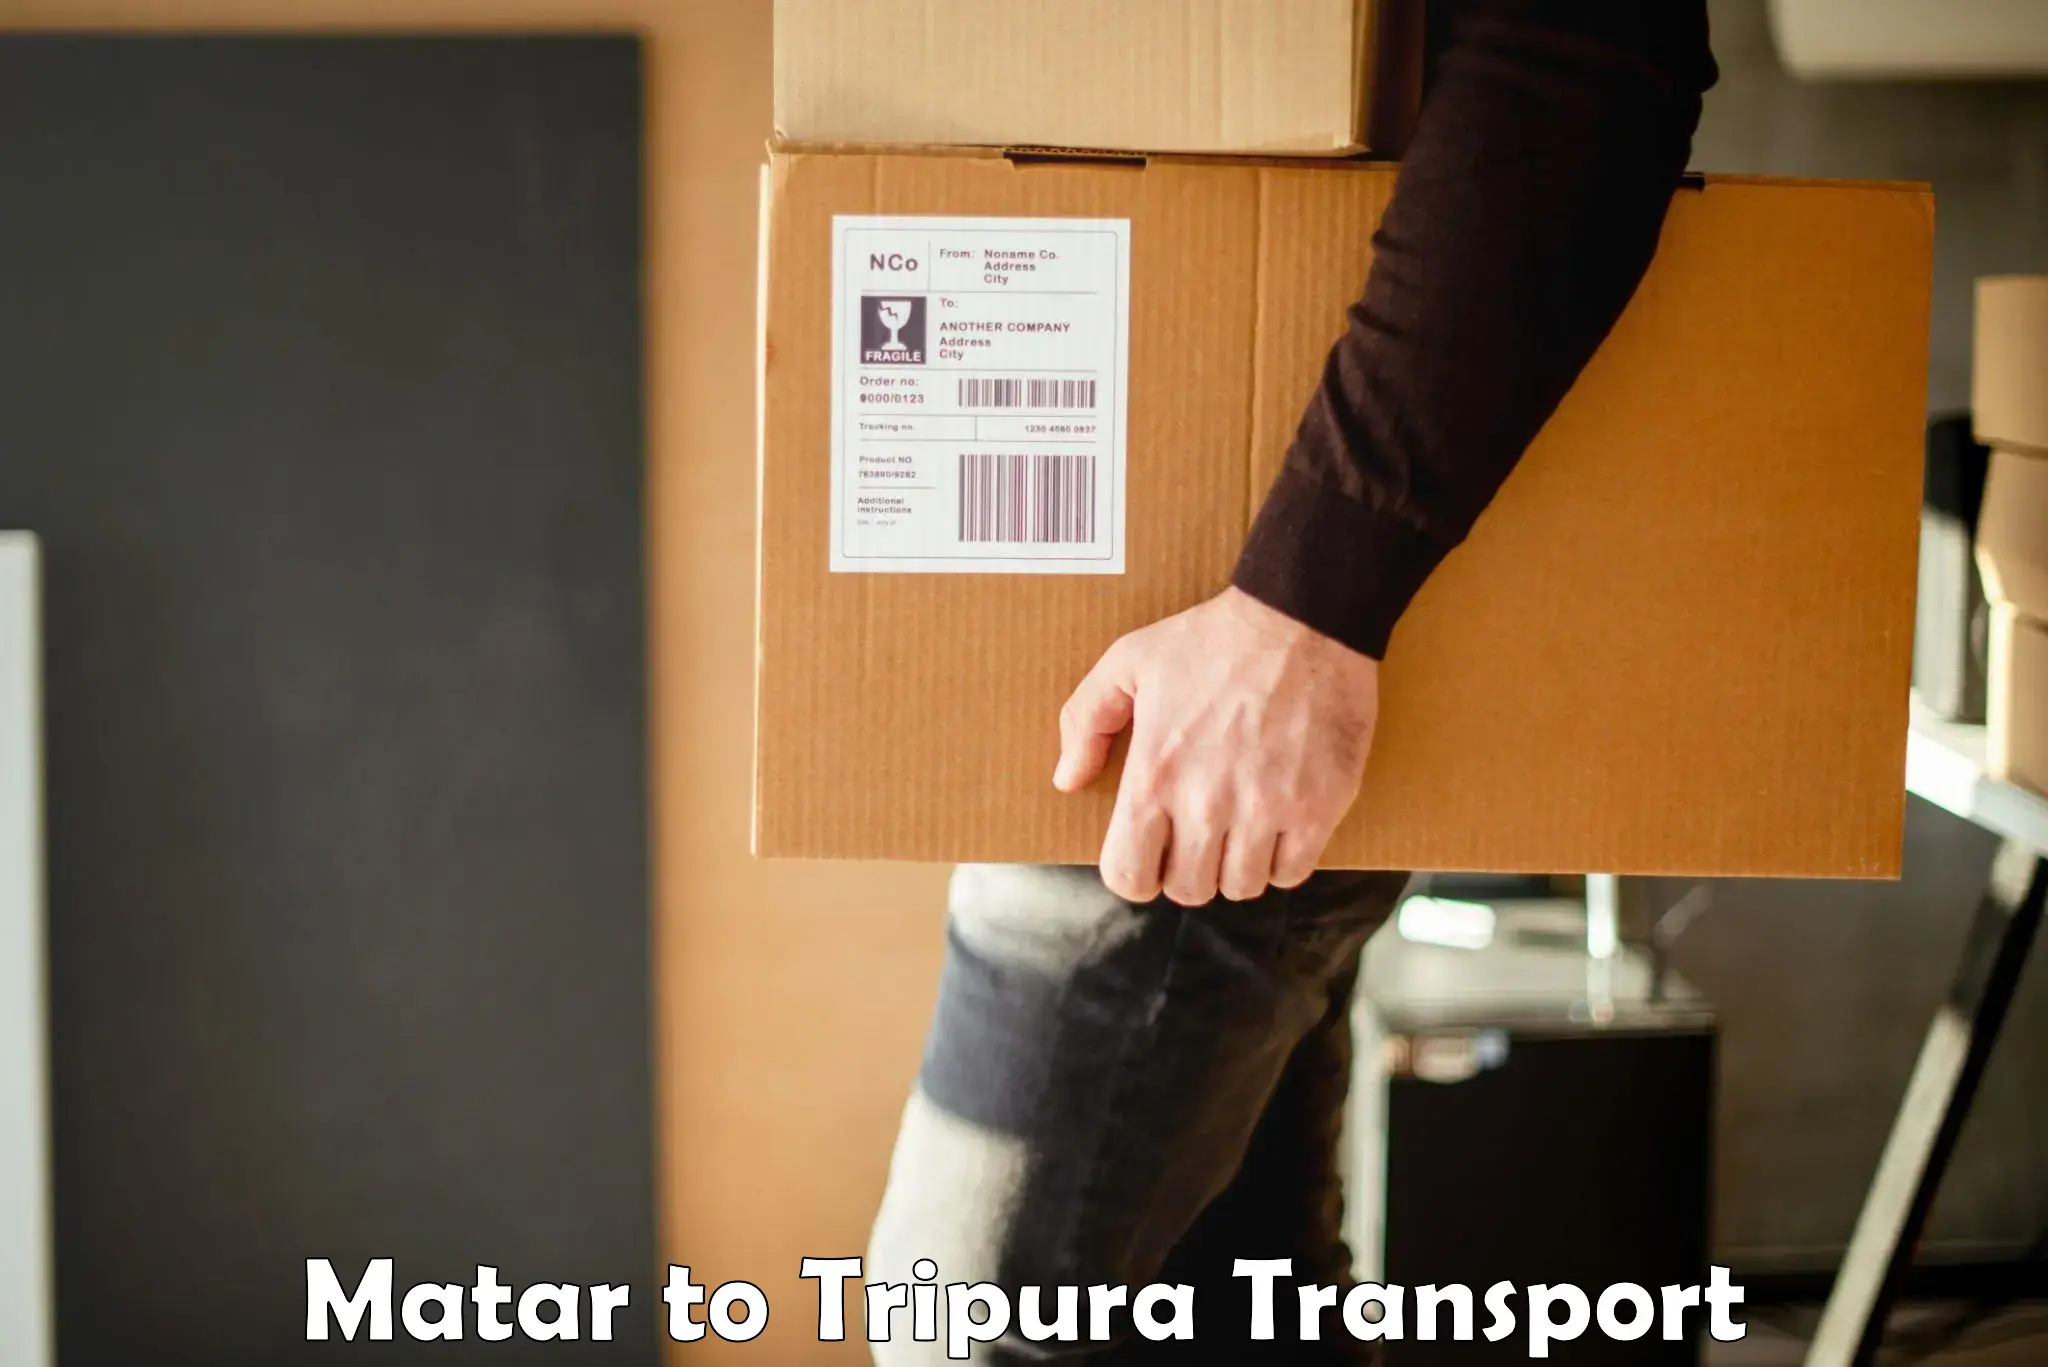 Nearby transport service Matar to Udaipur Tripura